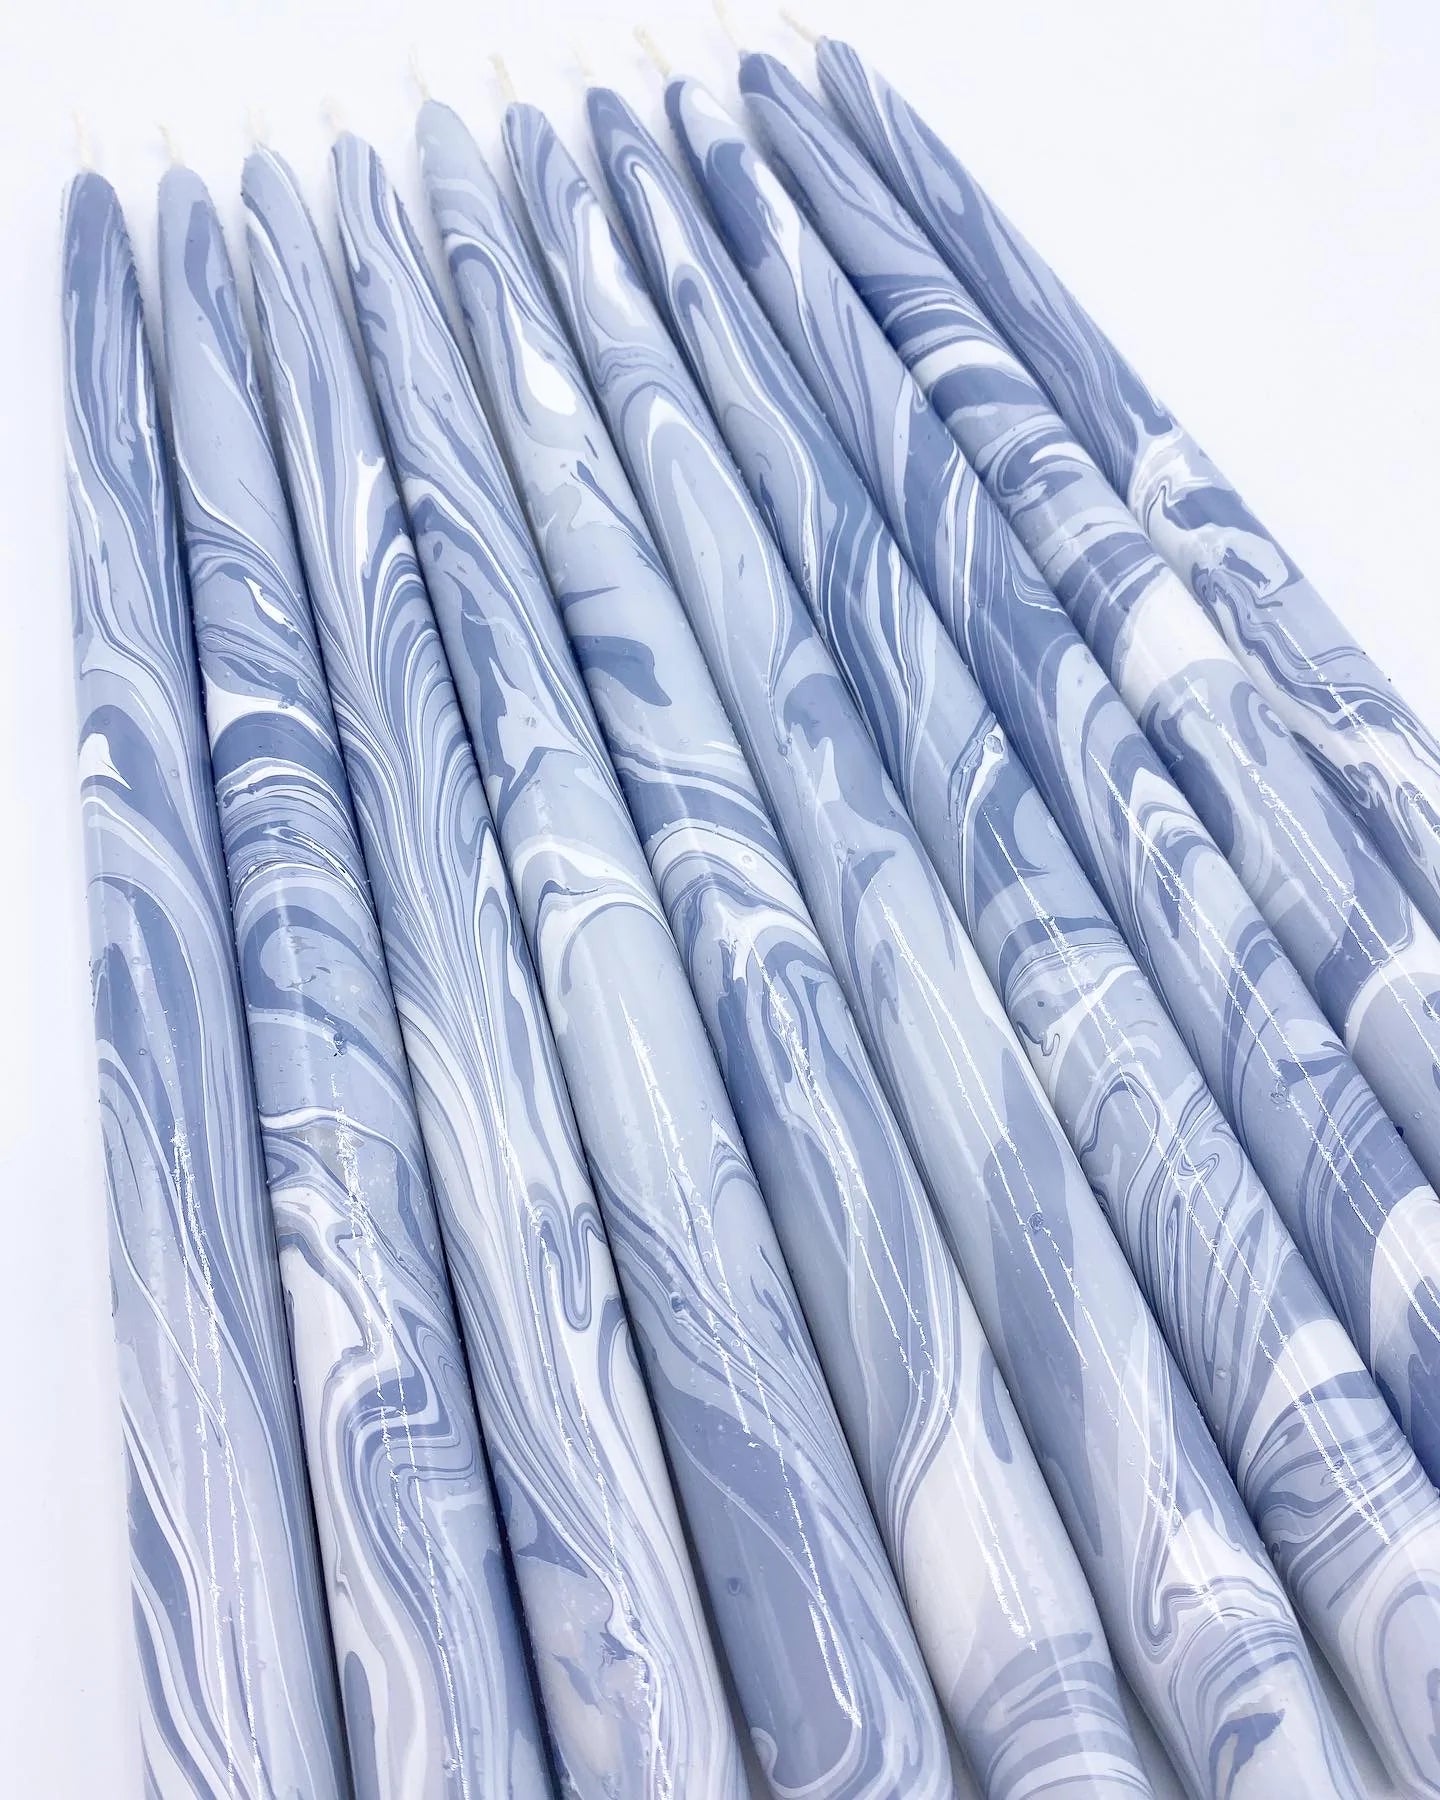 12" Marbled Taper Candle - (multiple colors)